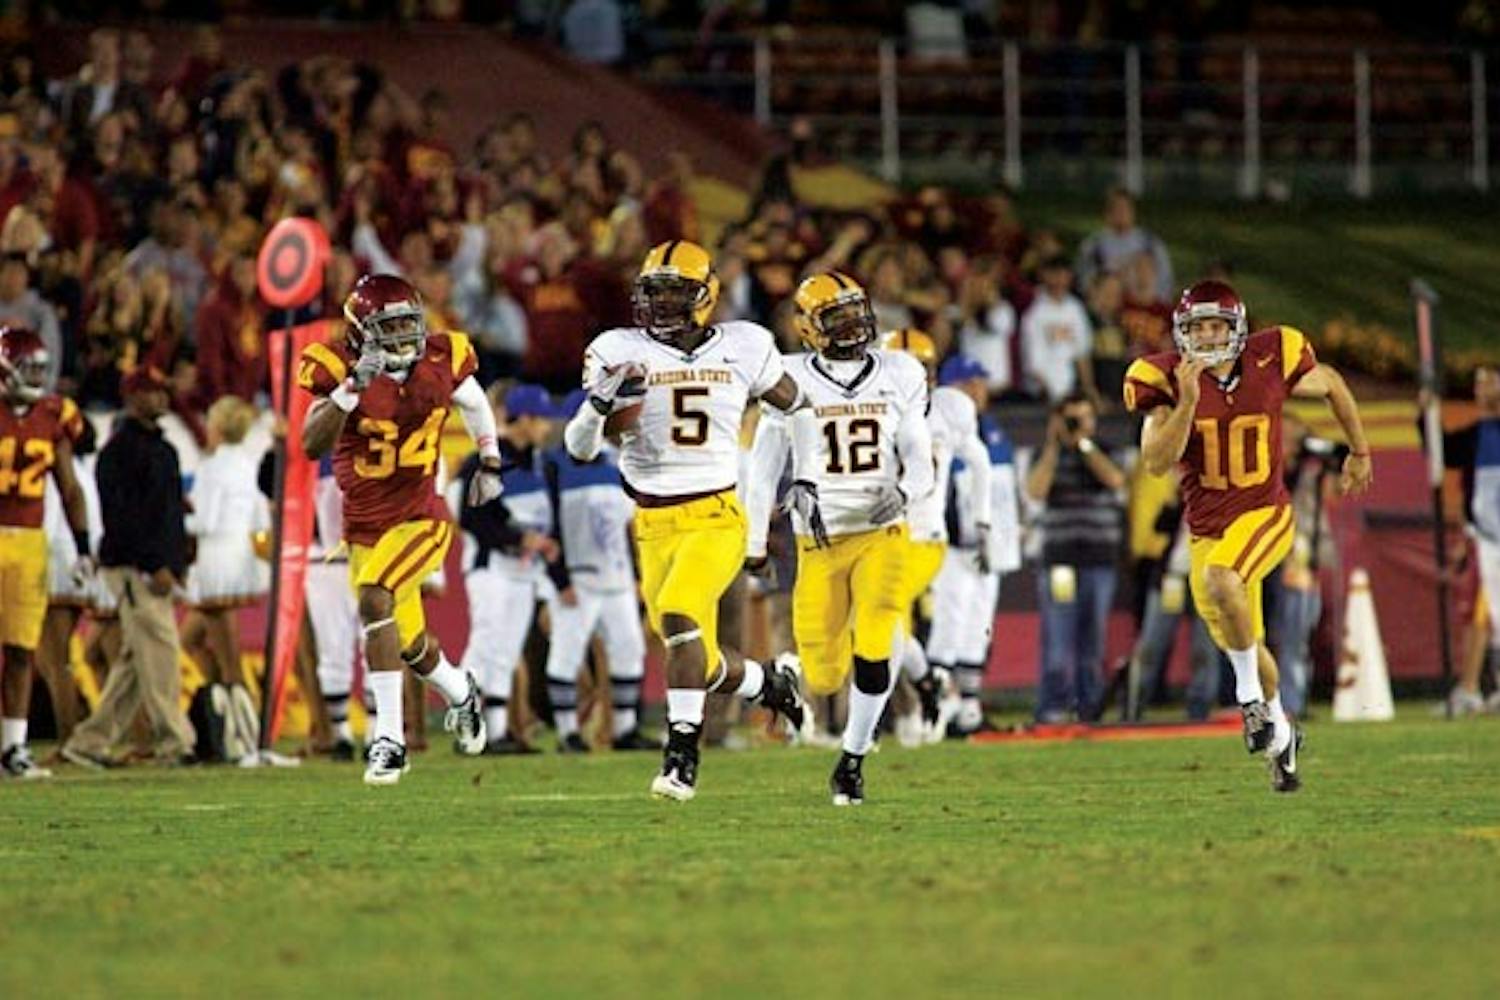 FUTILE CHASE: Senior cornerback LeQuan Lewis outruns USC defenders during last Sautrday's 34-33 ASU loss. Lewis returned a kickoff 100 yards for a touchdown just a week after making a key interception in ASU's win over Washington State. (Photo by Scott Stuk)